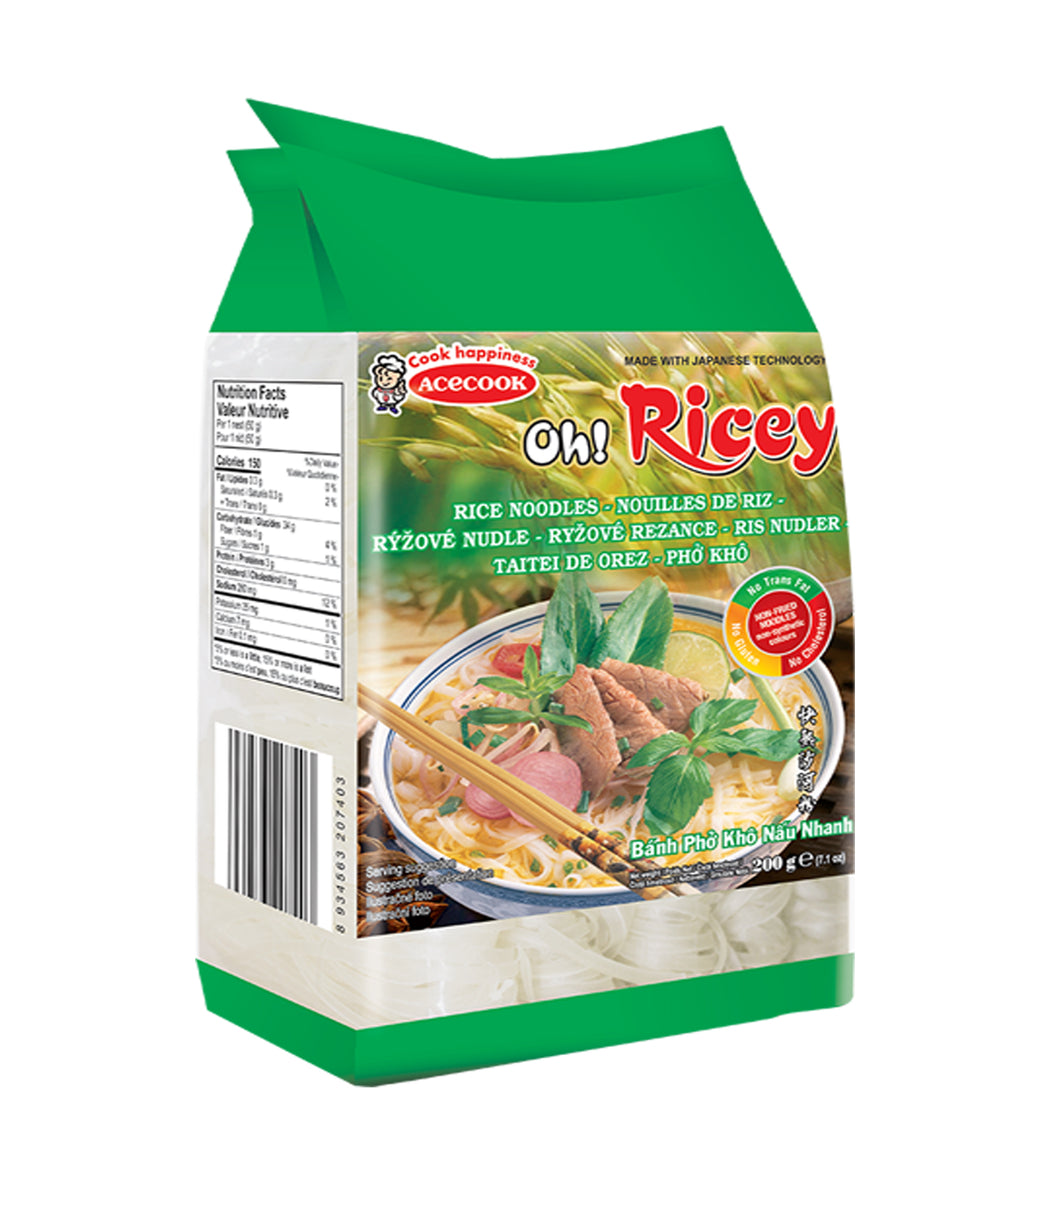 Acecook Oh Ricey Rice Noodles 500g - Acecook 越南河粉